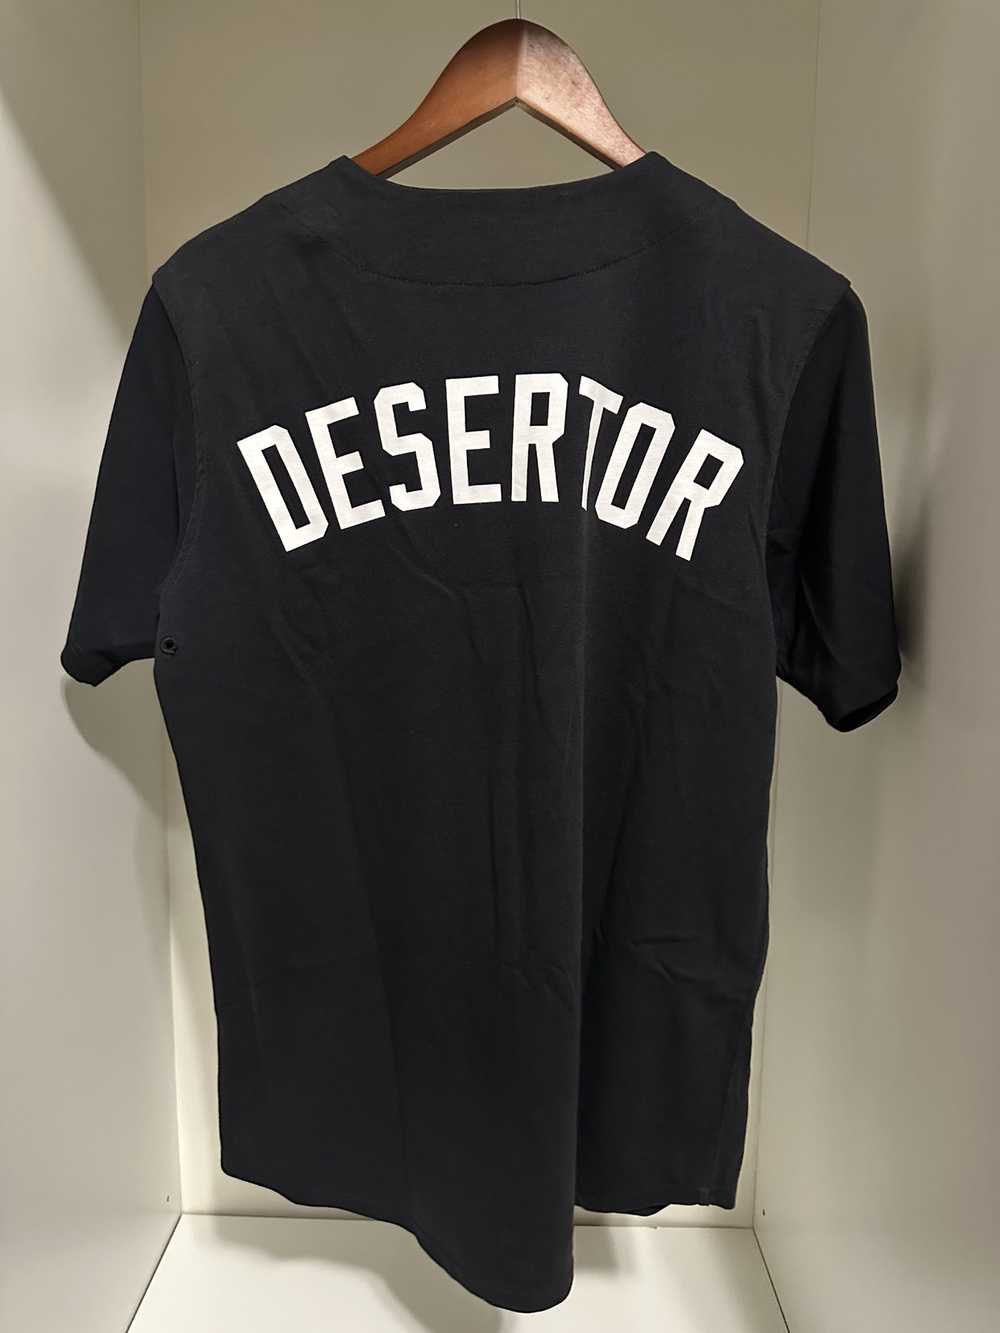 UNDEFEATED BASEBALL LOGO S/S JERSEY – Undefeated